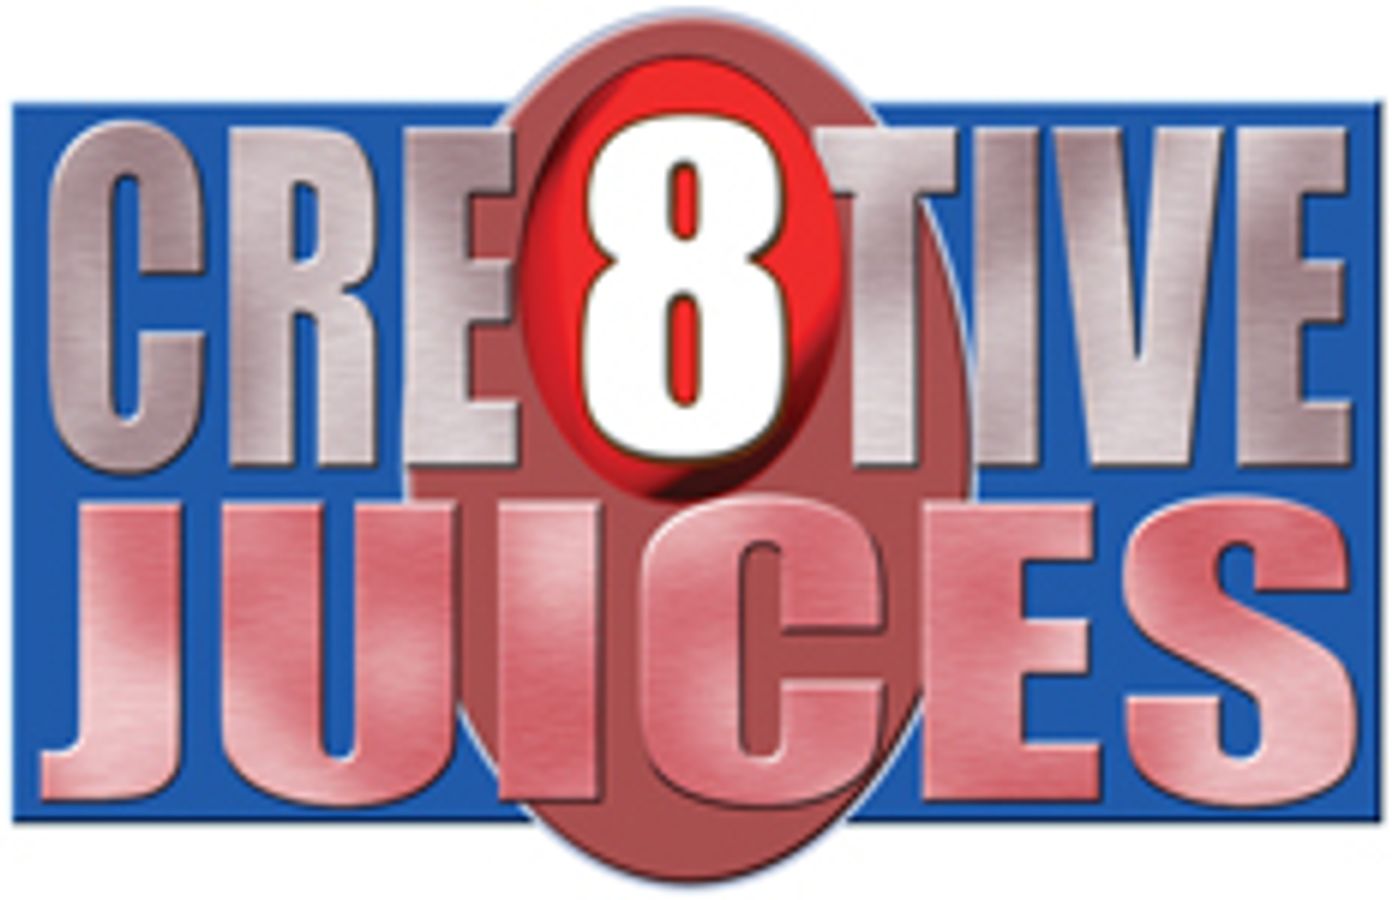 Cre8tive Juices